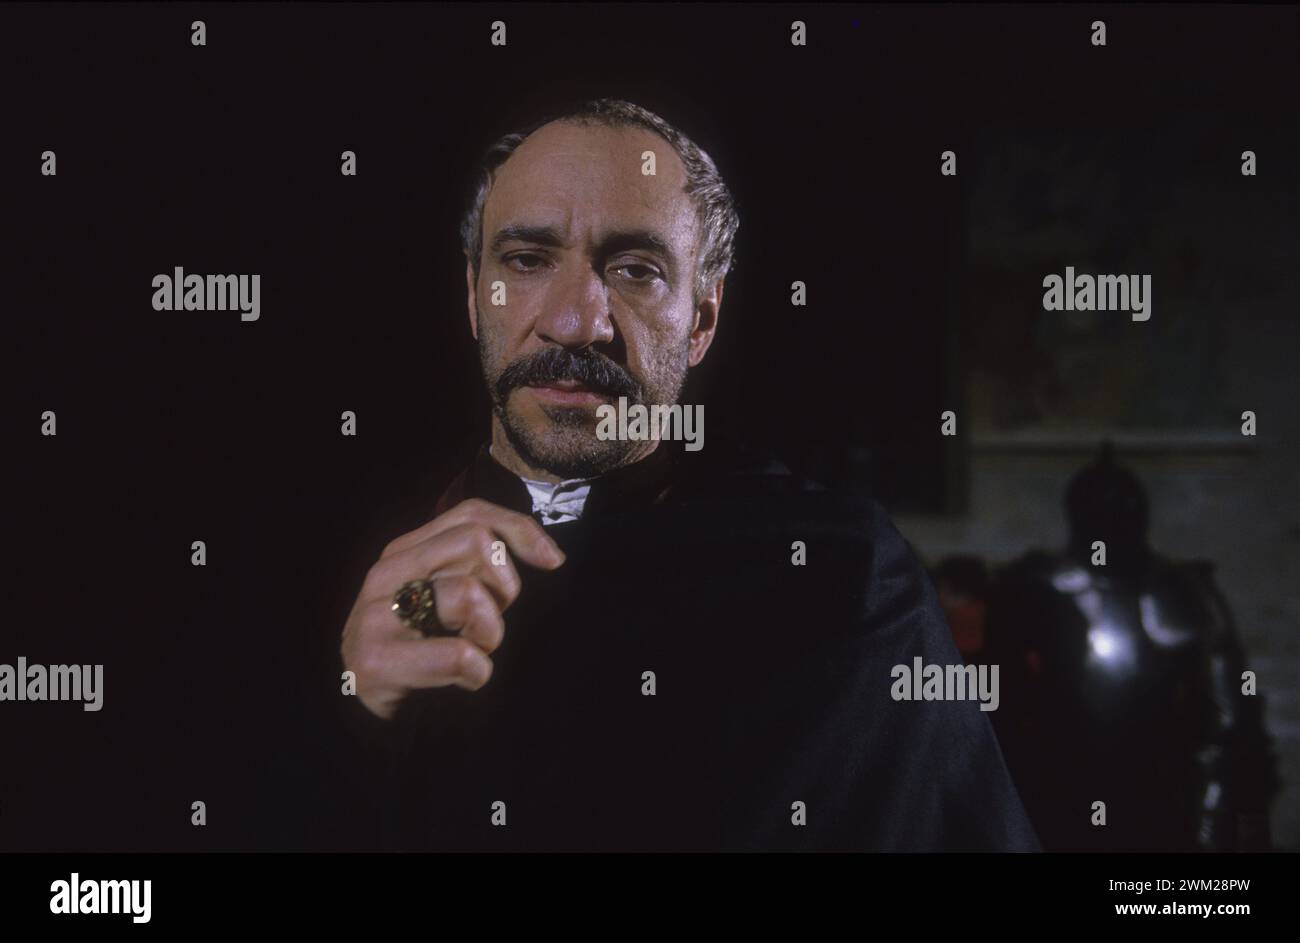 MME4800808 Rocca Borromeo in Angera (Varese), 1988. American actor F. Murray Abraham in the role of L'Innominato (the Unnamed) on the set of the Italian TV movie “” I promessi sposi”” (The Betrothed) directed by Salvatore Nocita/Rocca Borromeo di Angera (Varese), 1988. L'attore F. Murray Abraham nel ruolo dell'Innominato sul set del film per la TV “” I promessi sposi”” diretto da Salvatore Nocita -; (add.info.: Rocca Borromeo in Angera (Varese), 1988. American actor F. Murray Abraham in the role of L'Innominato (the Unnamed) on the set of the Italian TV movie “” I promessi sposi”” (The Bet Stock Photo